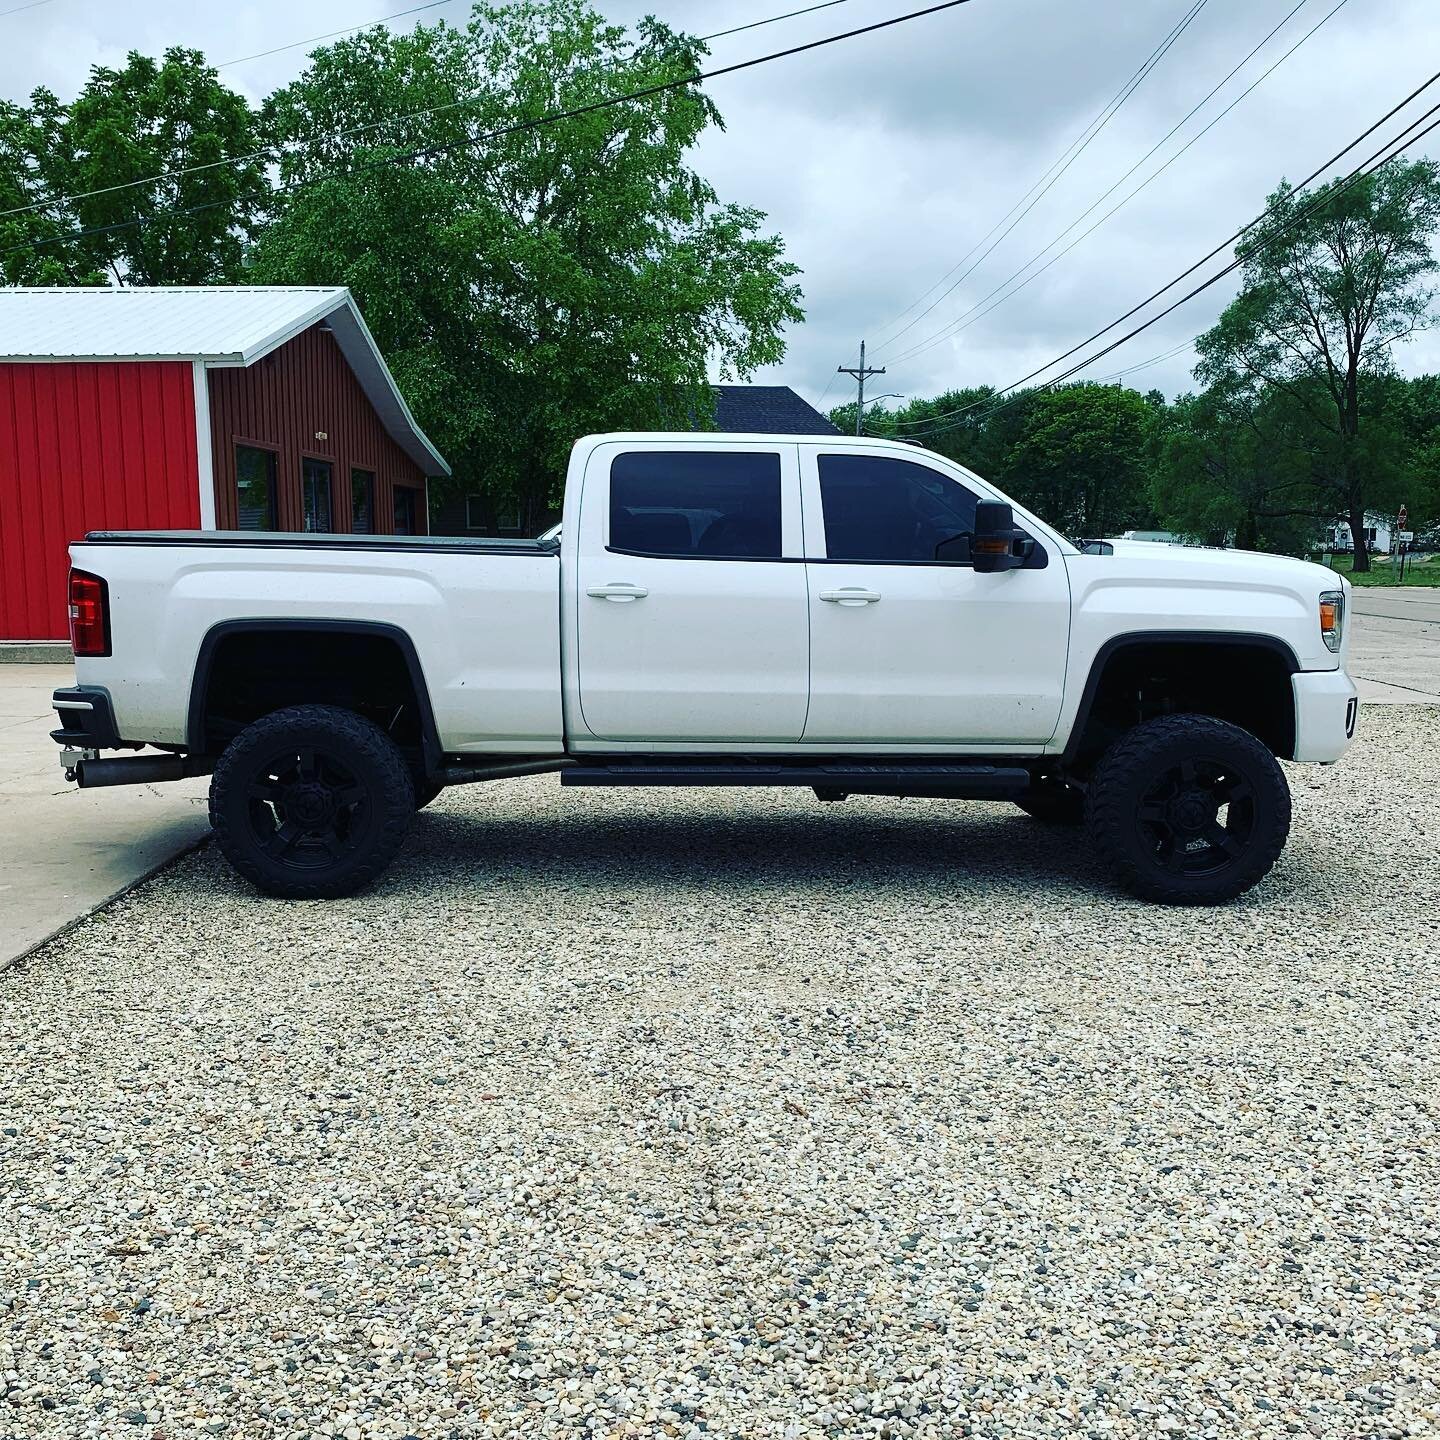 Just finished up a @Zoneoffroad lift on this good-looking GMC Sierra 2500 All Terrain. Thanks for bringing it to us, Scott! #zoneoffroad #xdwheels